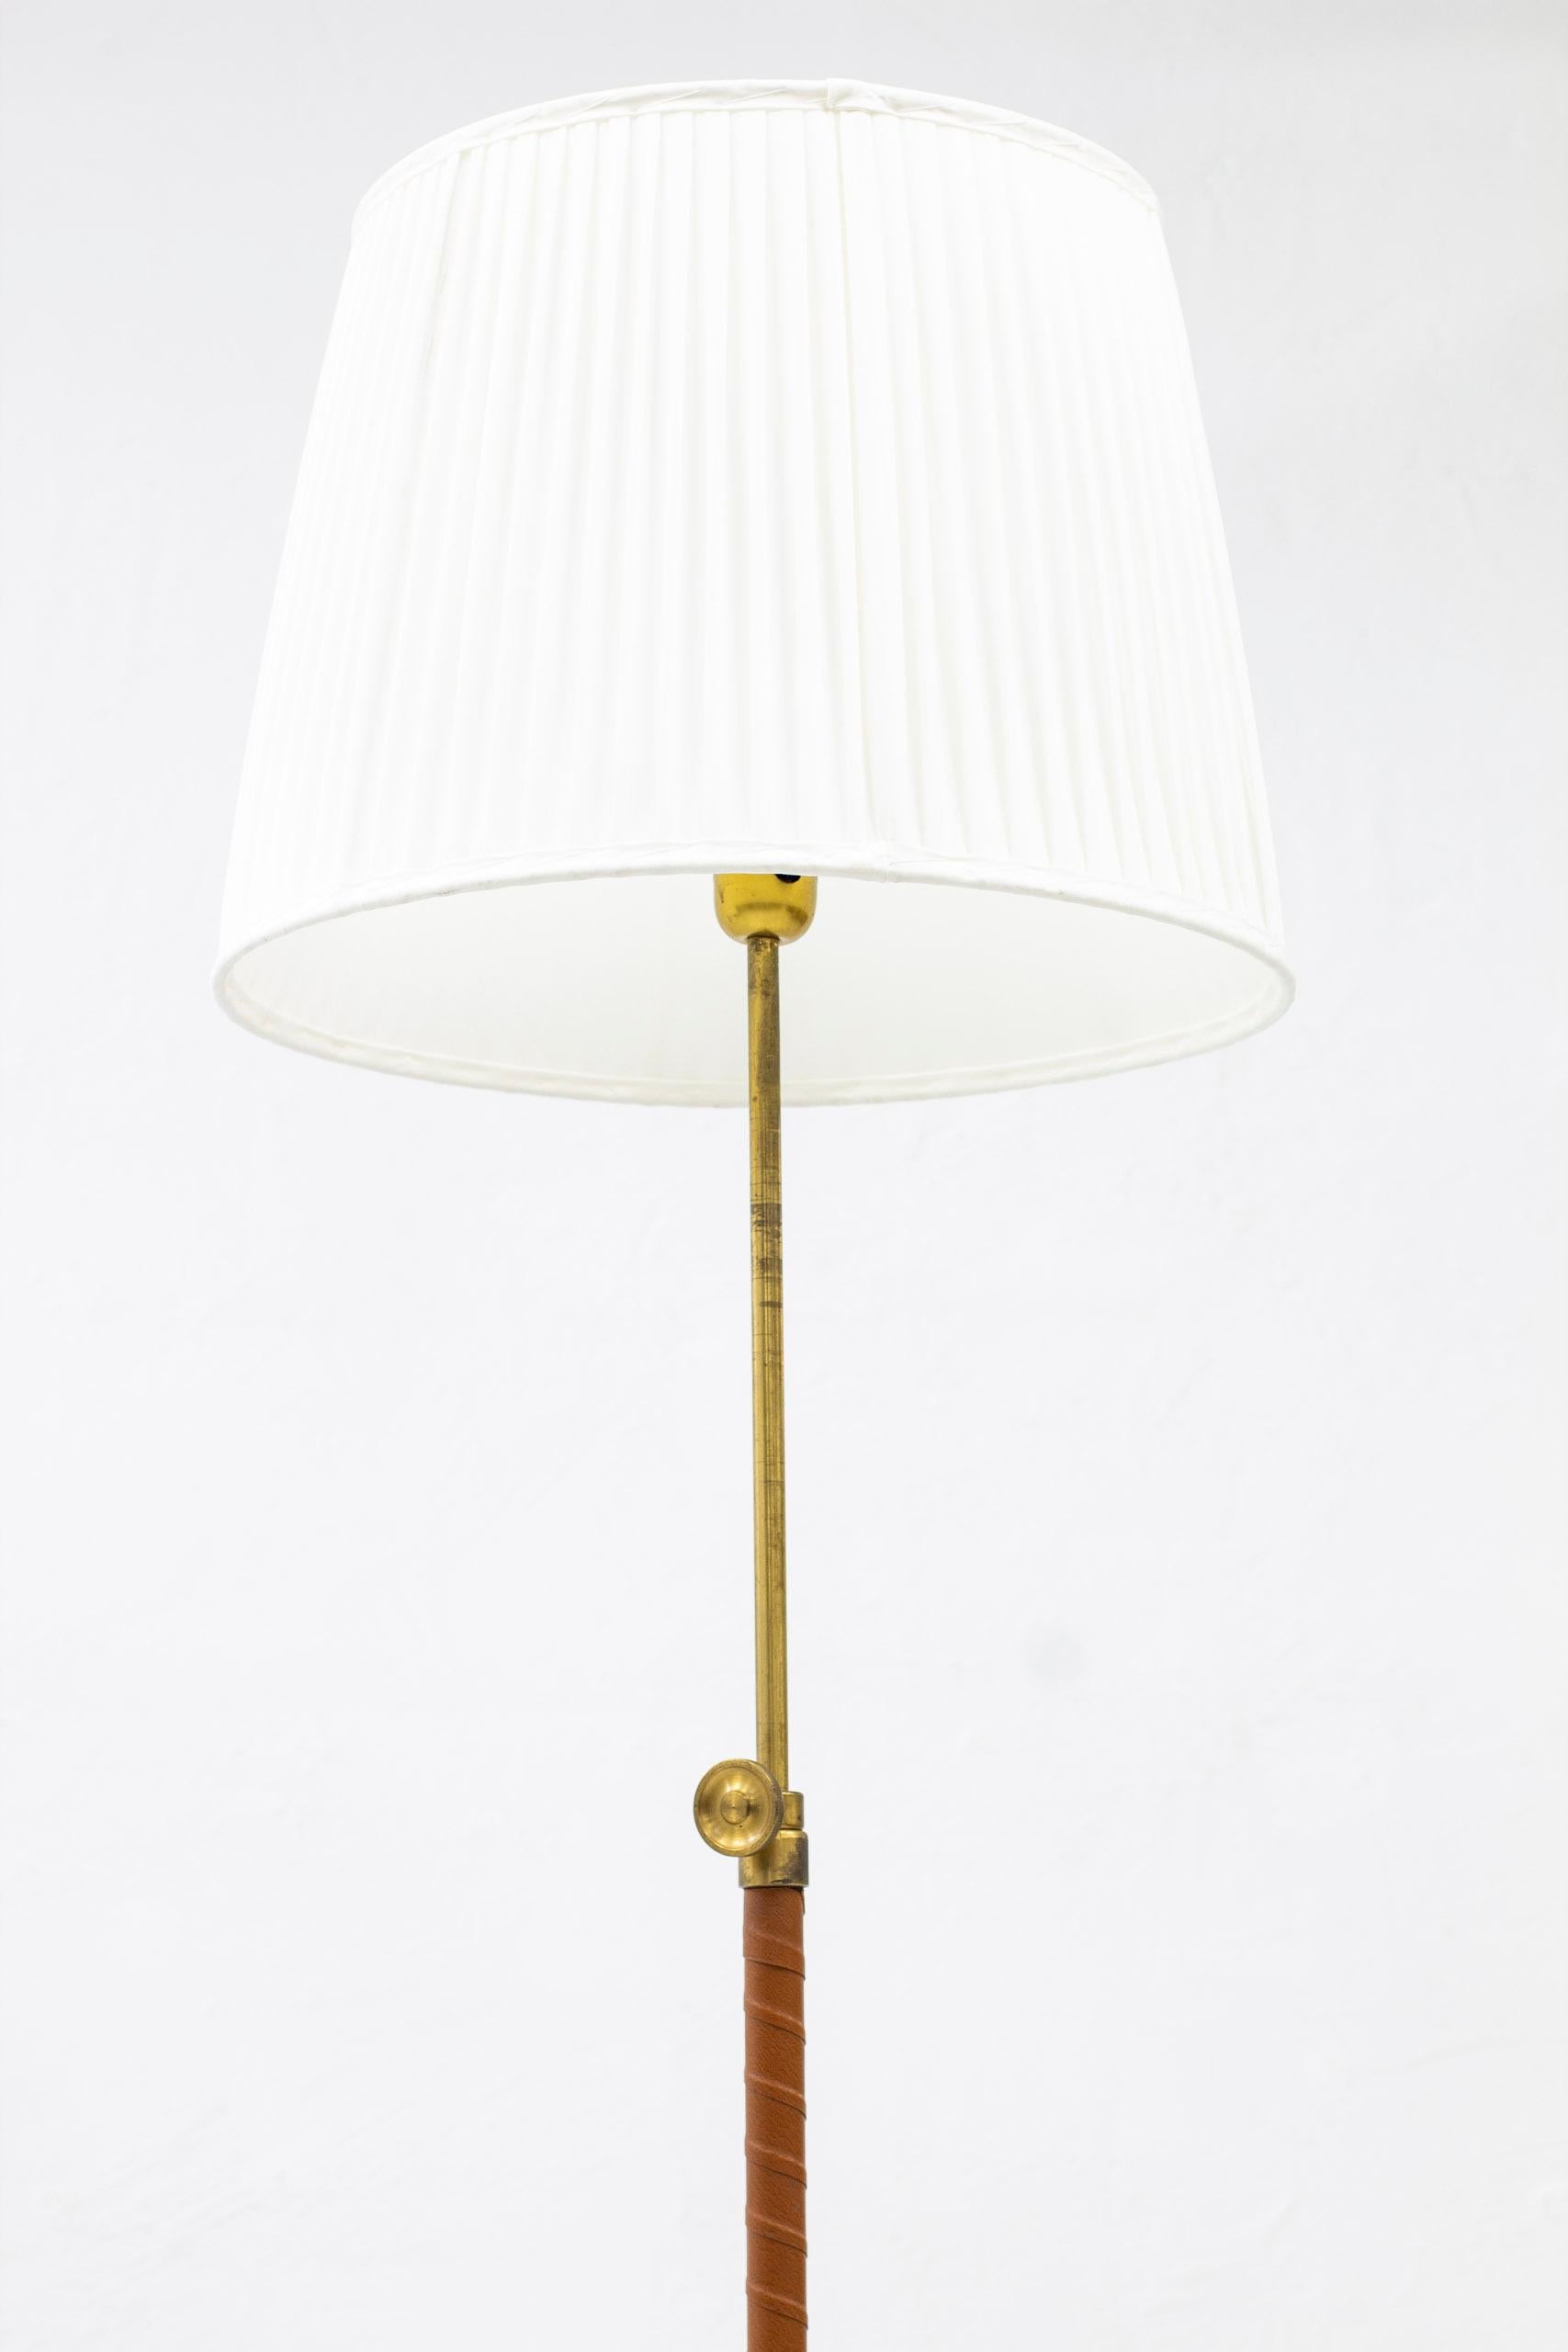 Mid-20th Century Swedish Leather and Brass Floor Lamp by ASEA, Sweden, 1950s